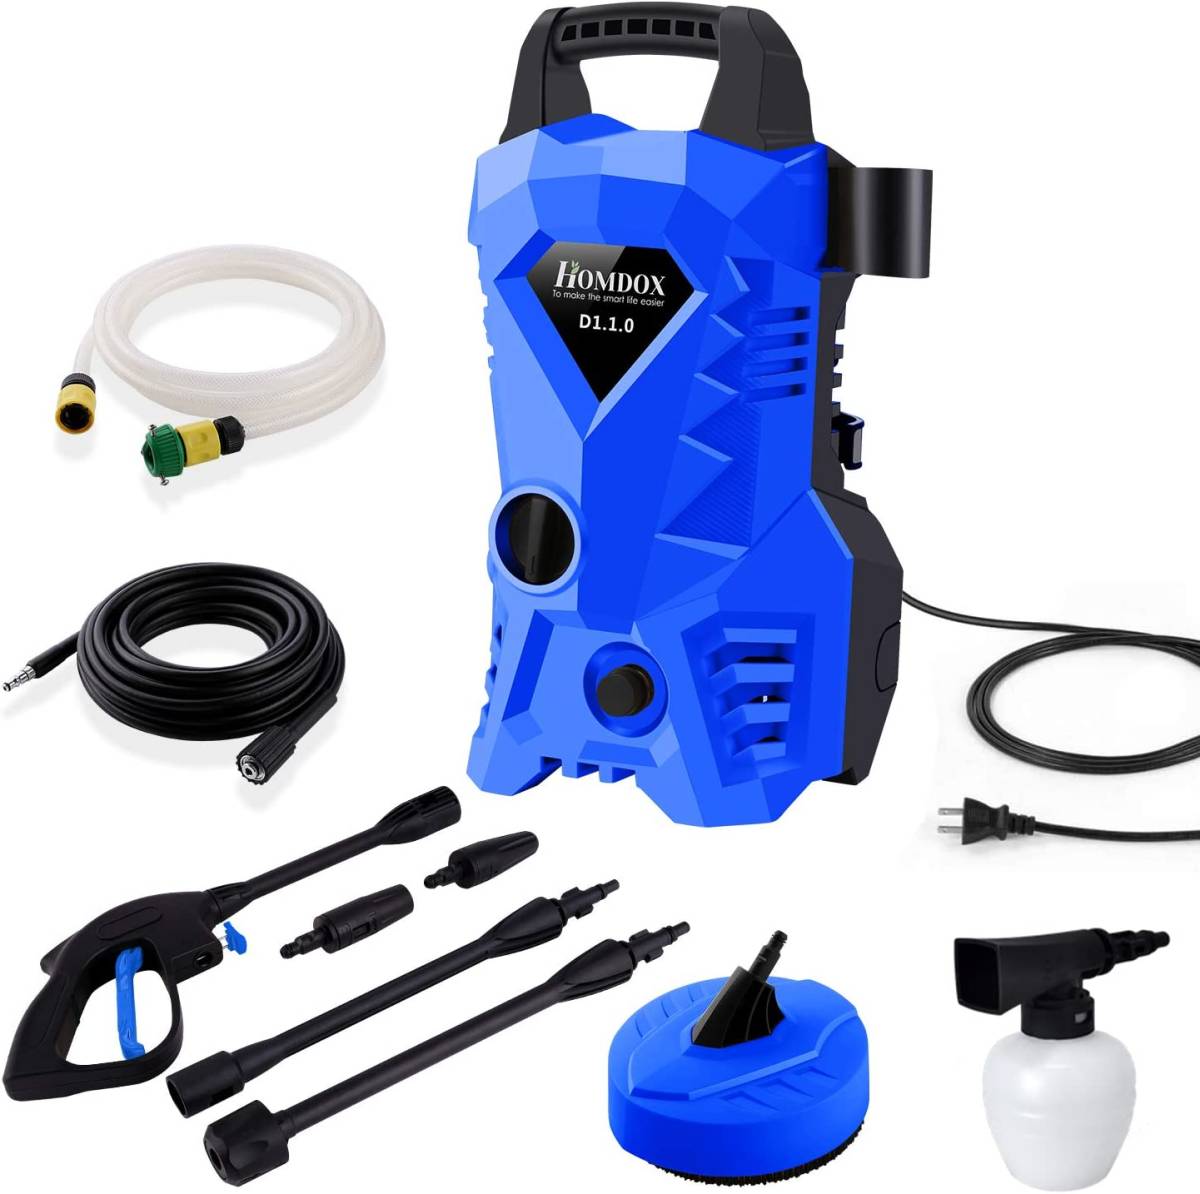 [ great special price ] high pressure washer 1400W height pressure car wash machine powerful 50Hz/60Hz higashi west Japan combined use small size light weight height pressure hose 10m water service hose 3m...15 set 